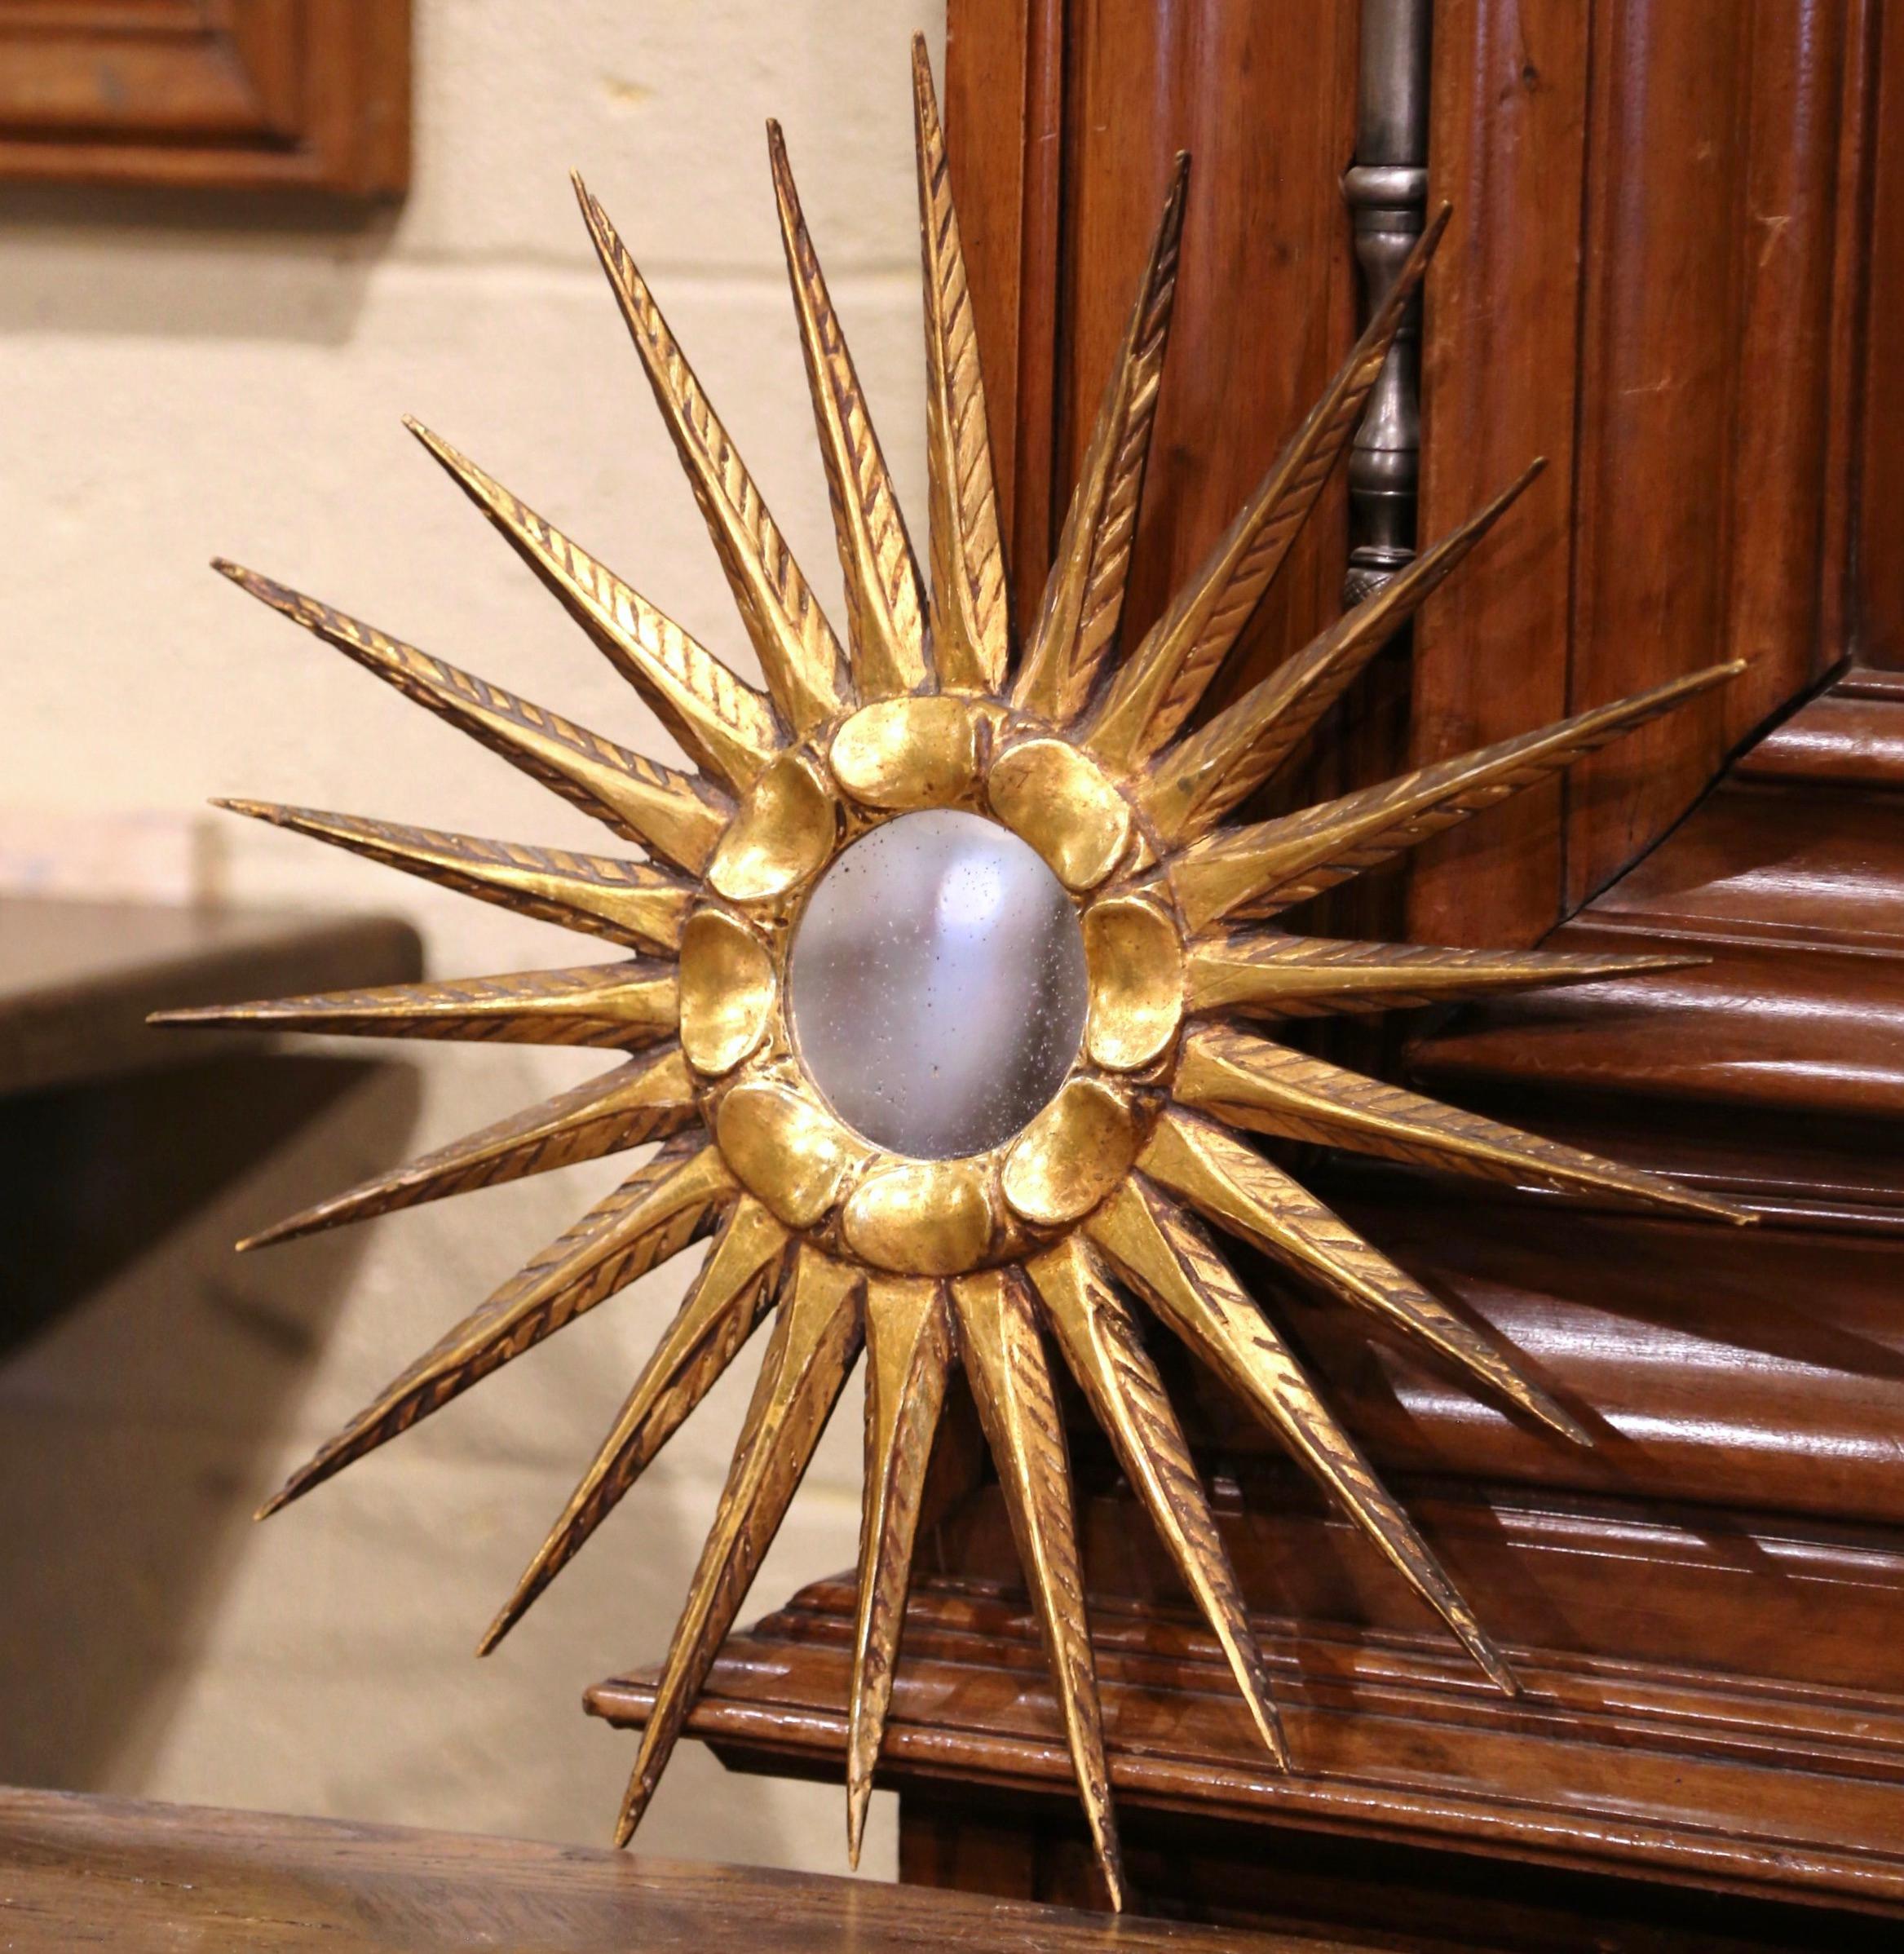 Add a beautiful shine to your home with this eye-catching and elegant gilt sunburst mirror. Crafted in Versailles, France circa 1960, the giltwood wall decor has a classic sunbeam shape with long and tapered rays, a round convex glass in the center.